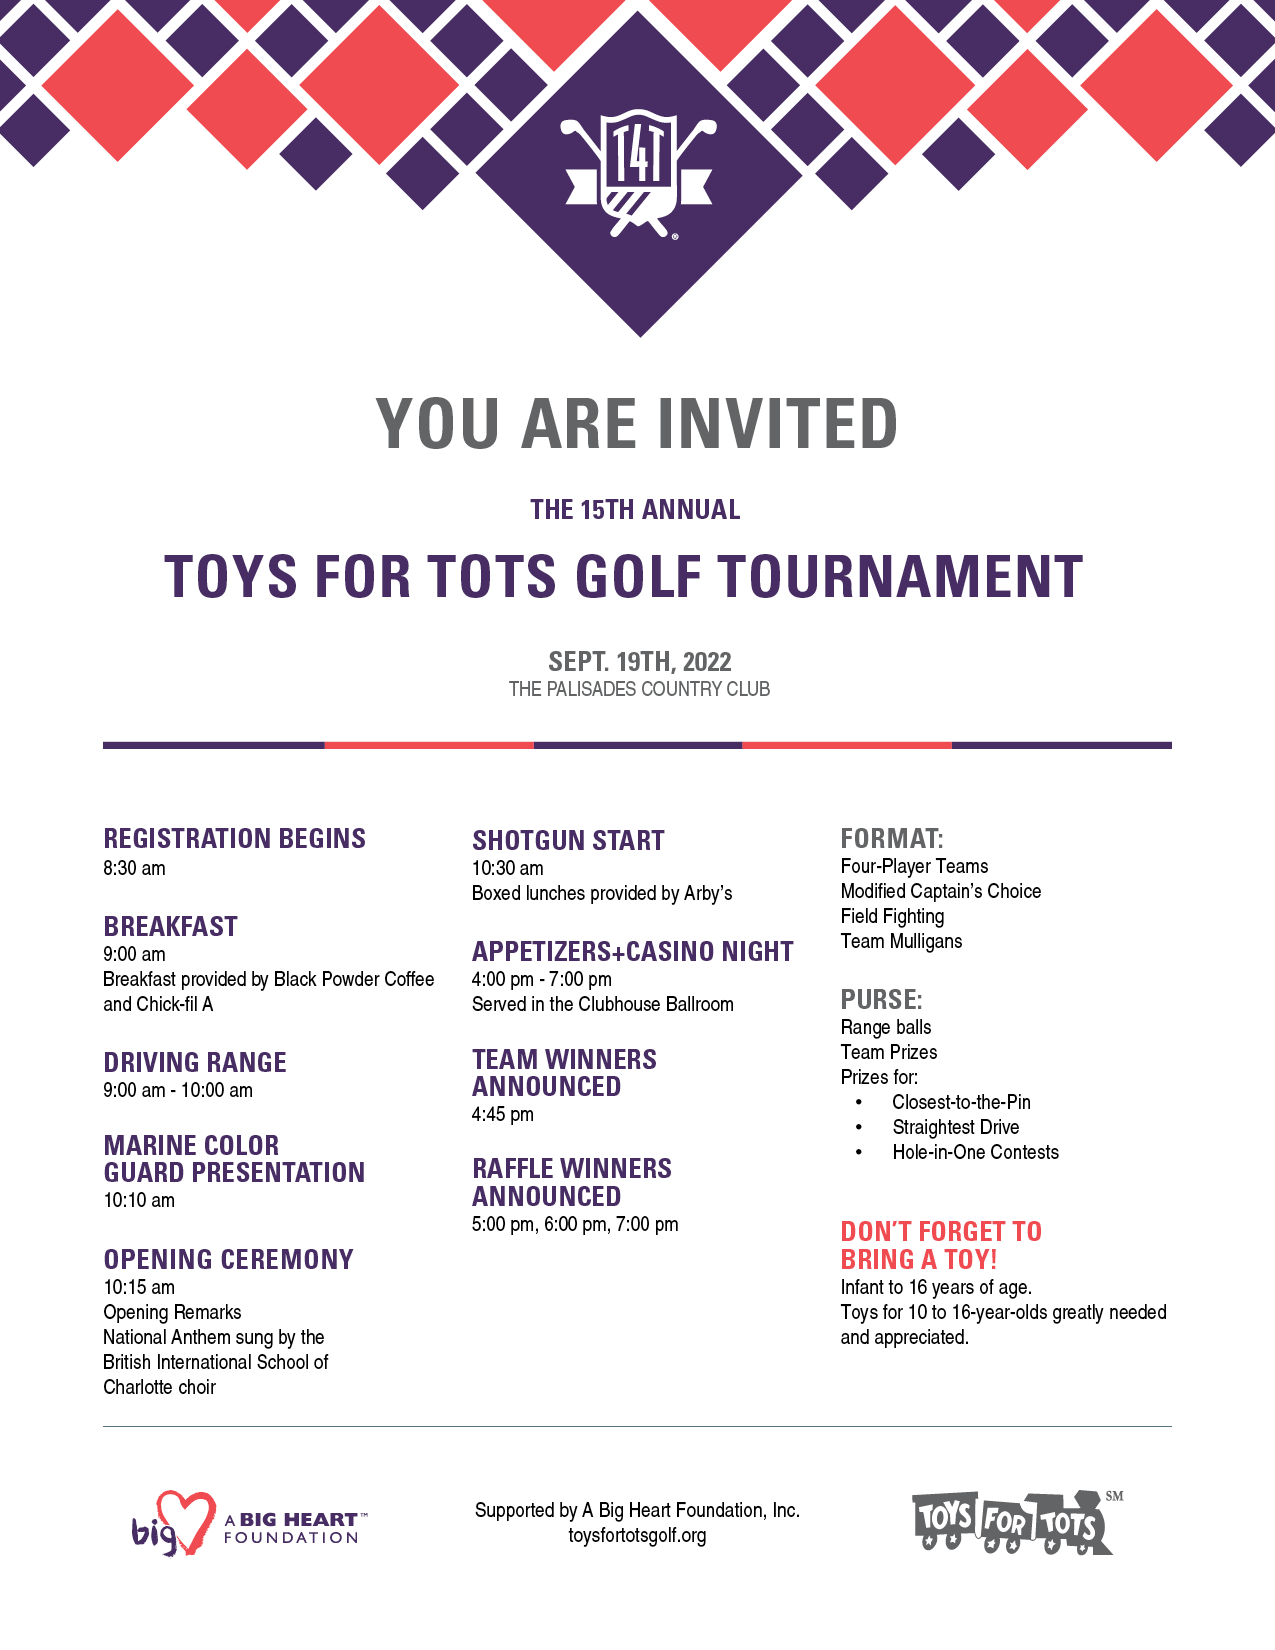 Toys for Tots Golf Tournament Itinerary